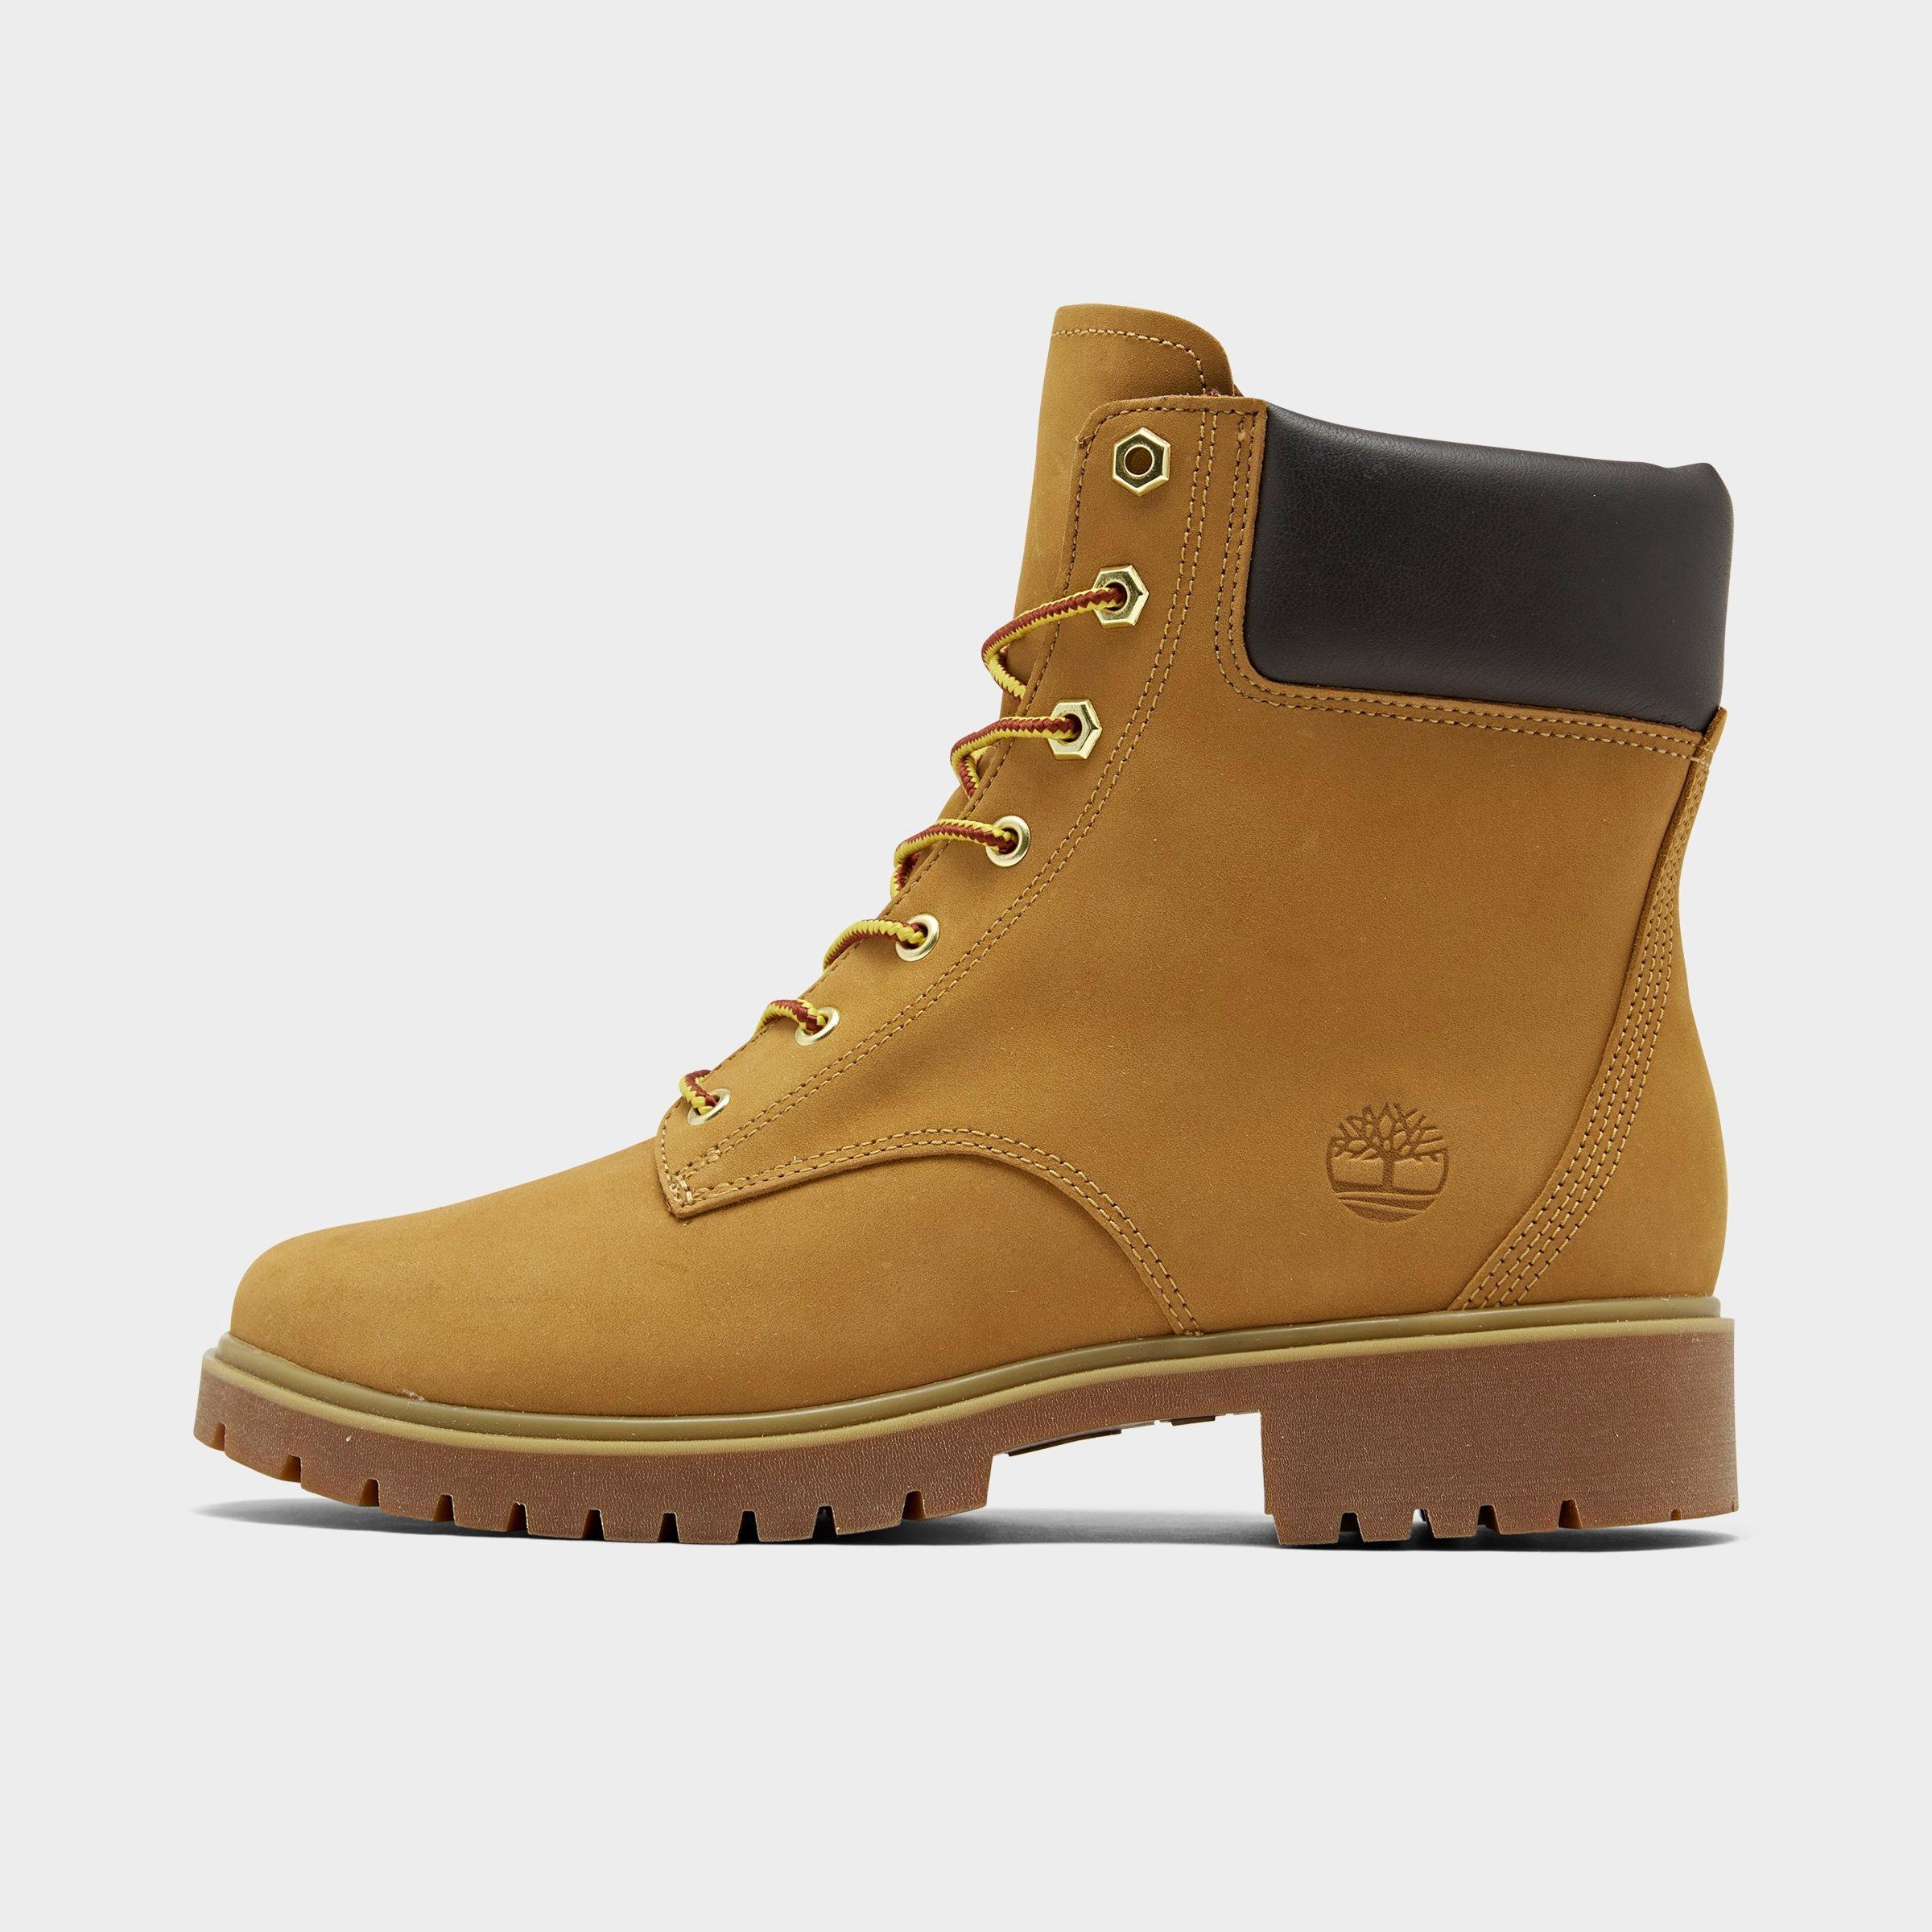 nikes that look like timberlands